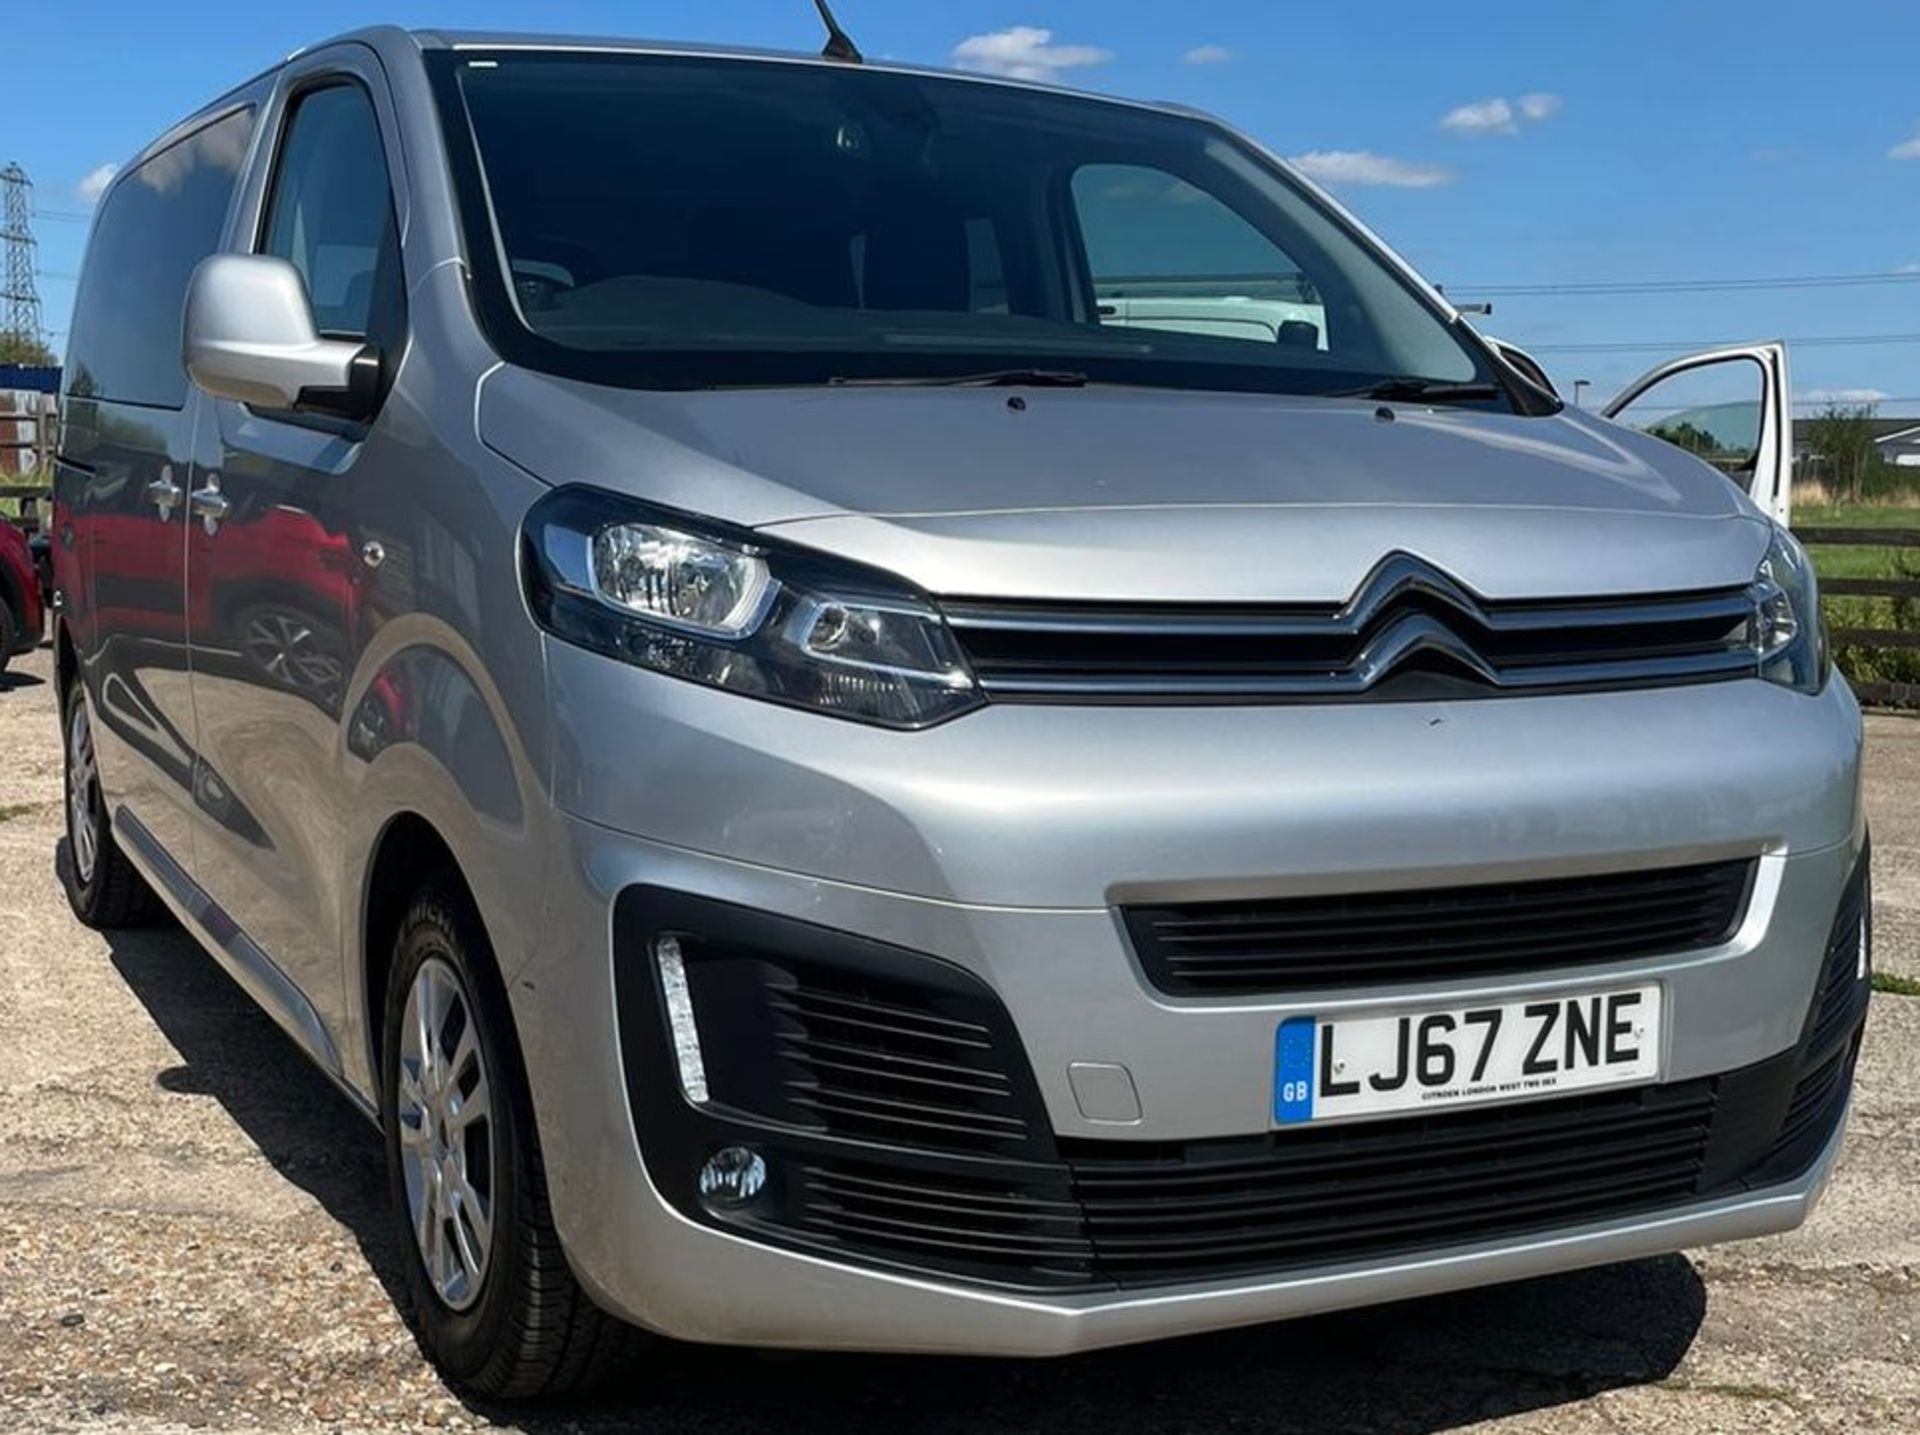 Citroen Spacetourer Business BHDI S/S 9-seater MPV, registration number: LJ67 ZNE with approximately